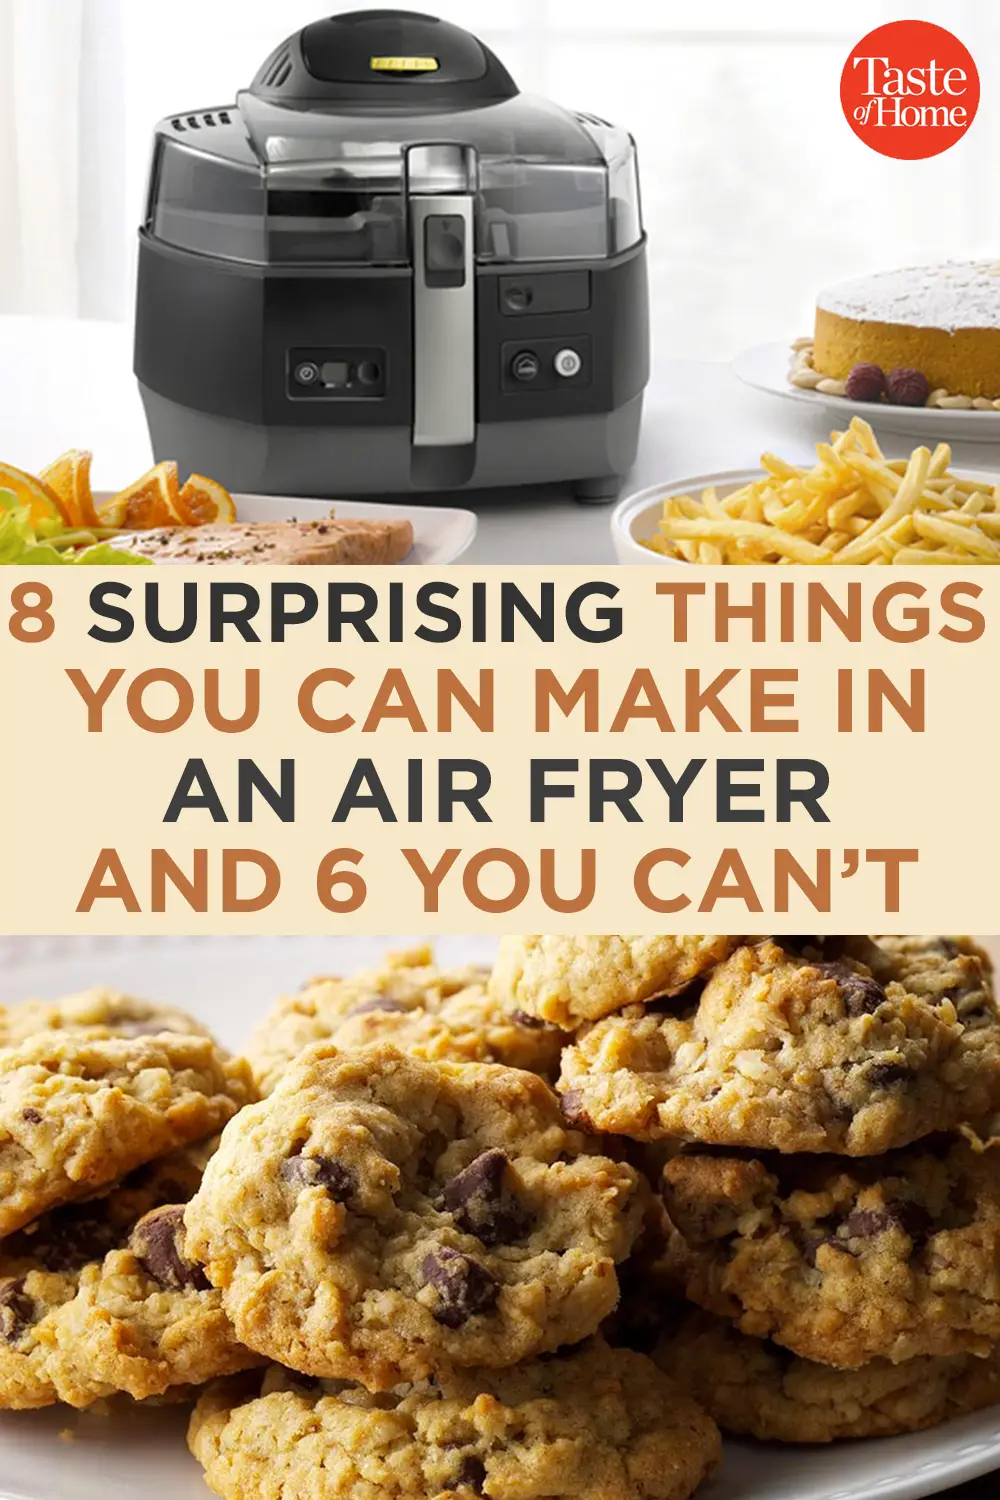 8 Surprising Things You Can Make in an Air Fryer...and 6 You Can